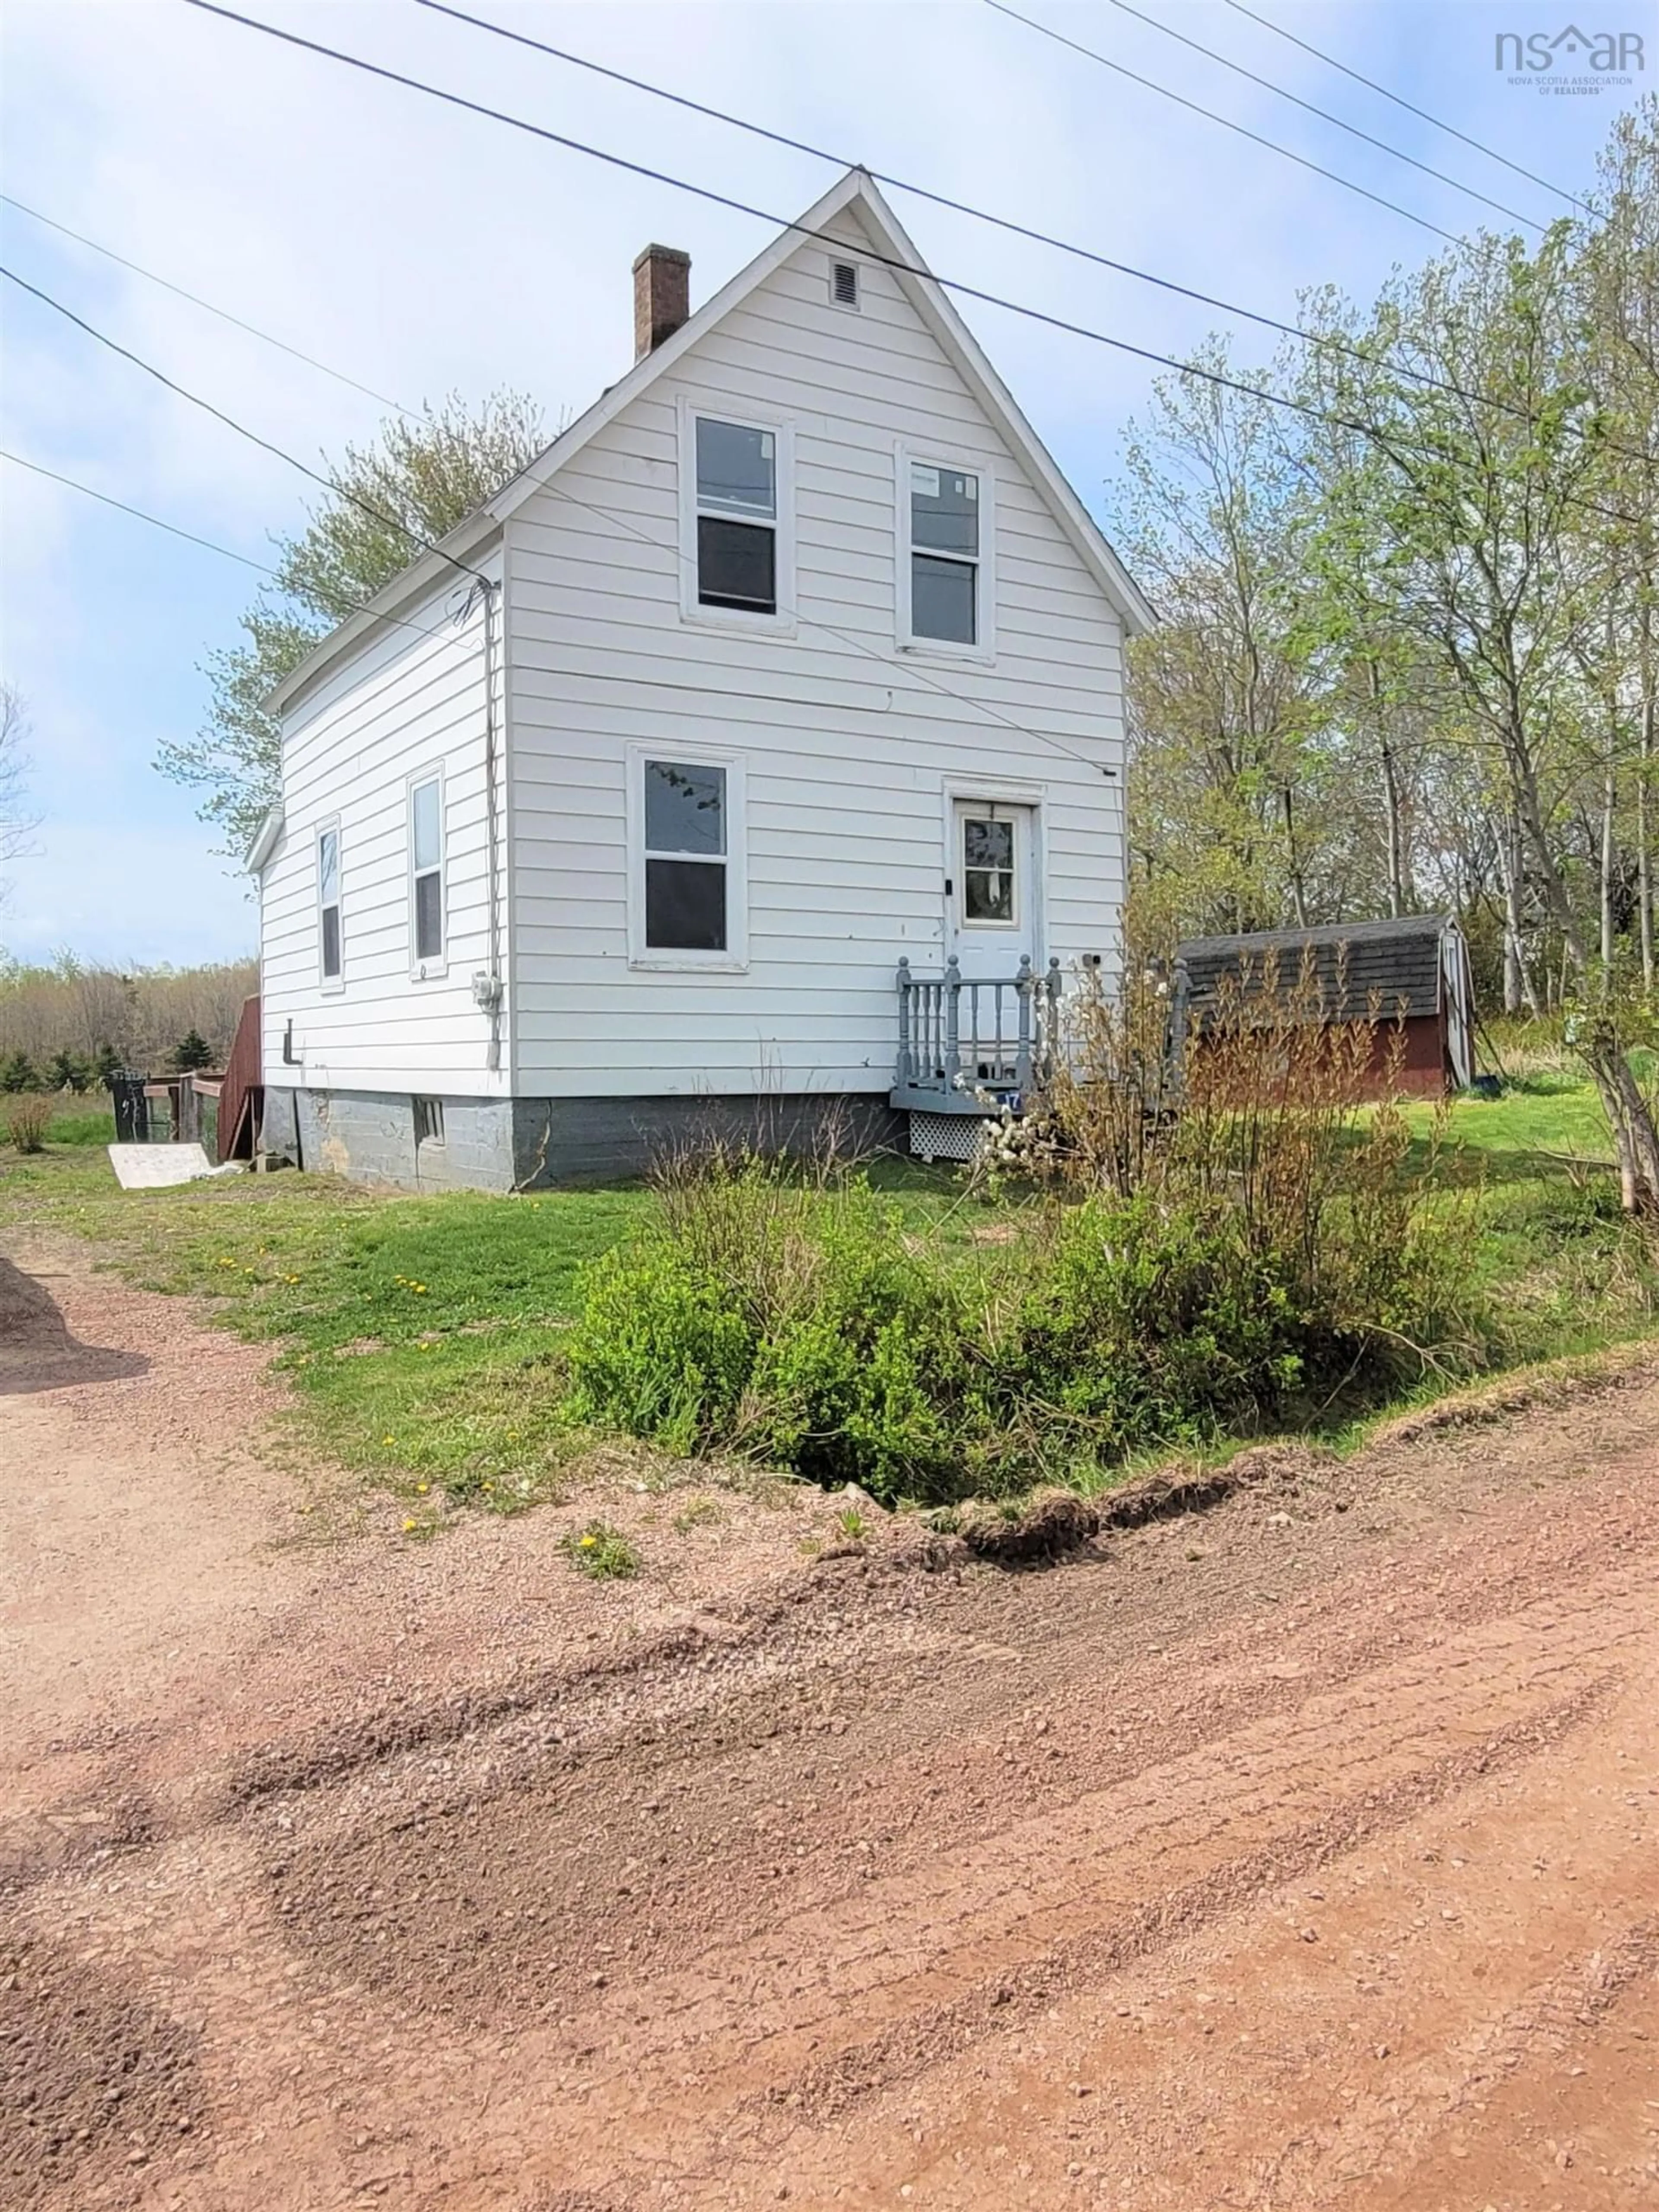 Home with unknown exterior material for 17 Kimberly Rd, River Hebert Nova Scotia B0L 1G0